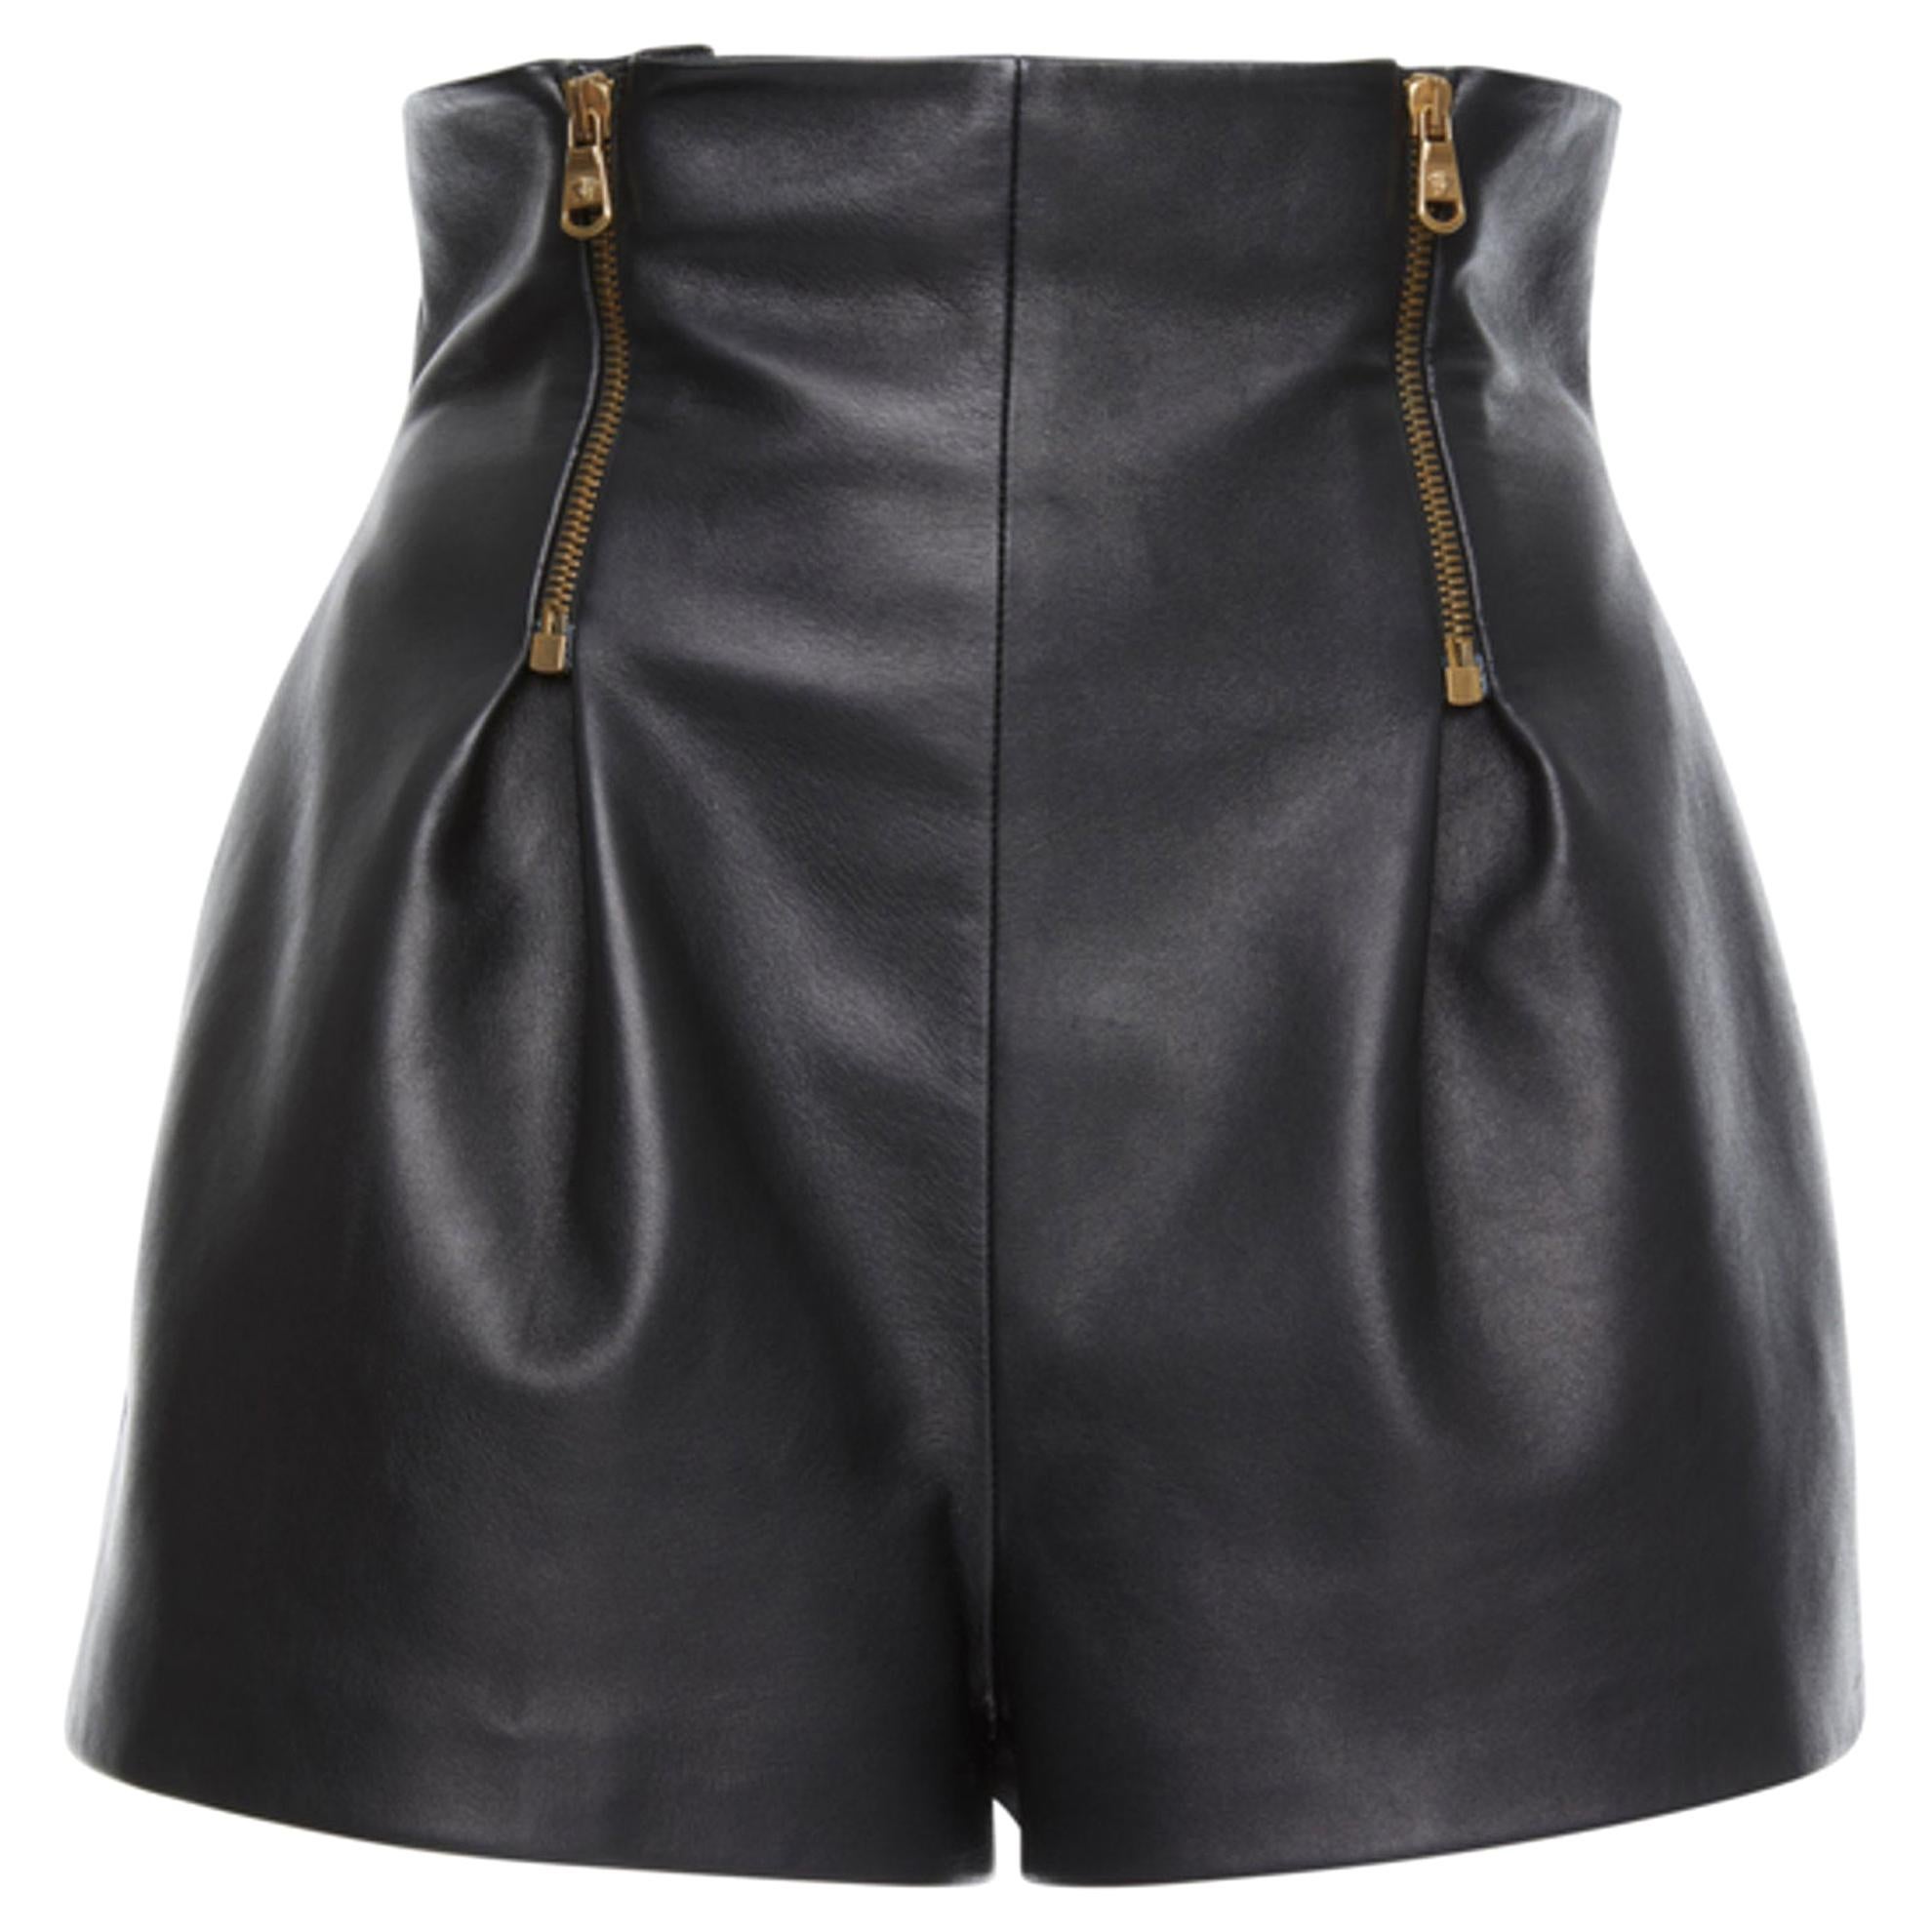 https://a.1stdibscdn.com/versace-ss19-black-high-waisted-leather-shorts-with-gold-tone-zippers-size-40-for-sale/1121189/v_127996321626373637188/12799632_master.jpg